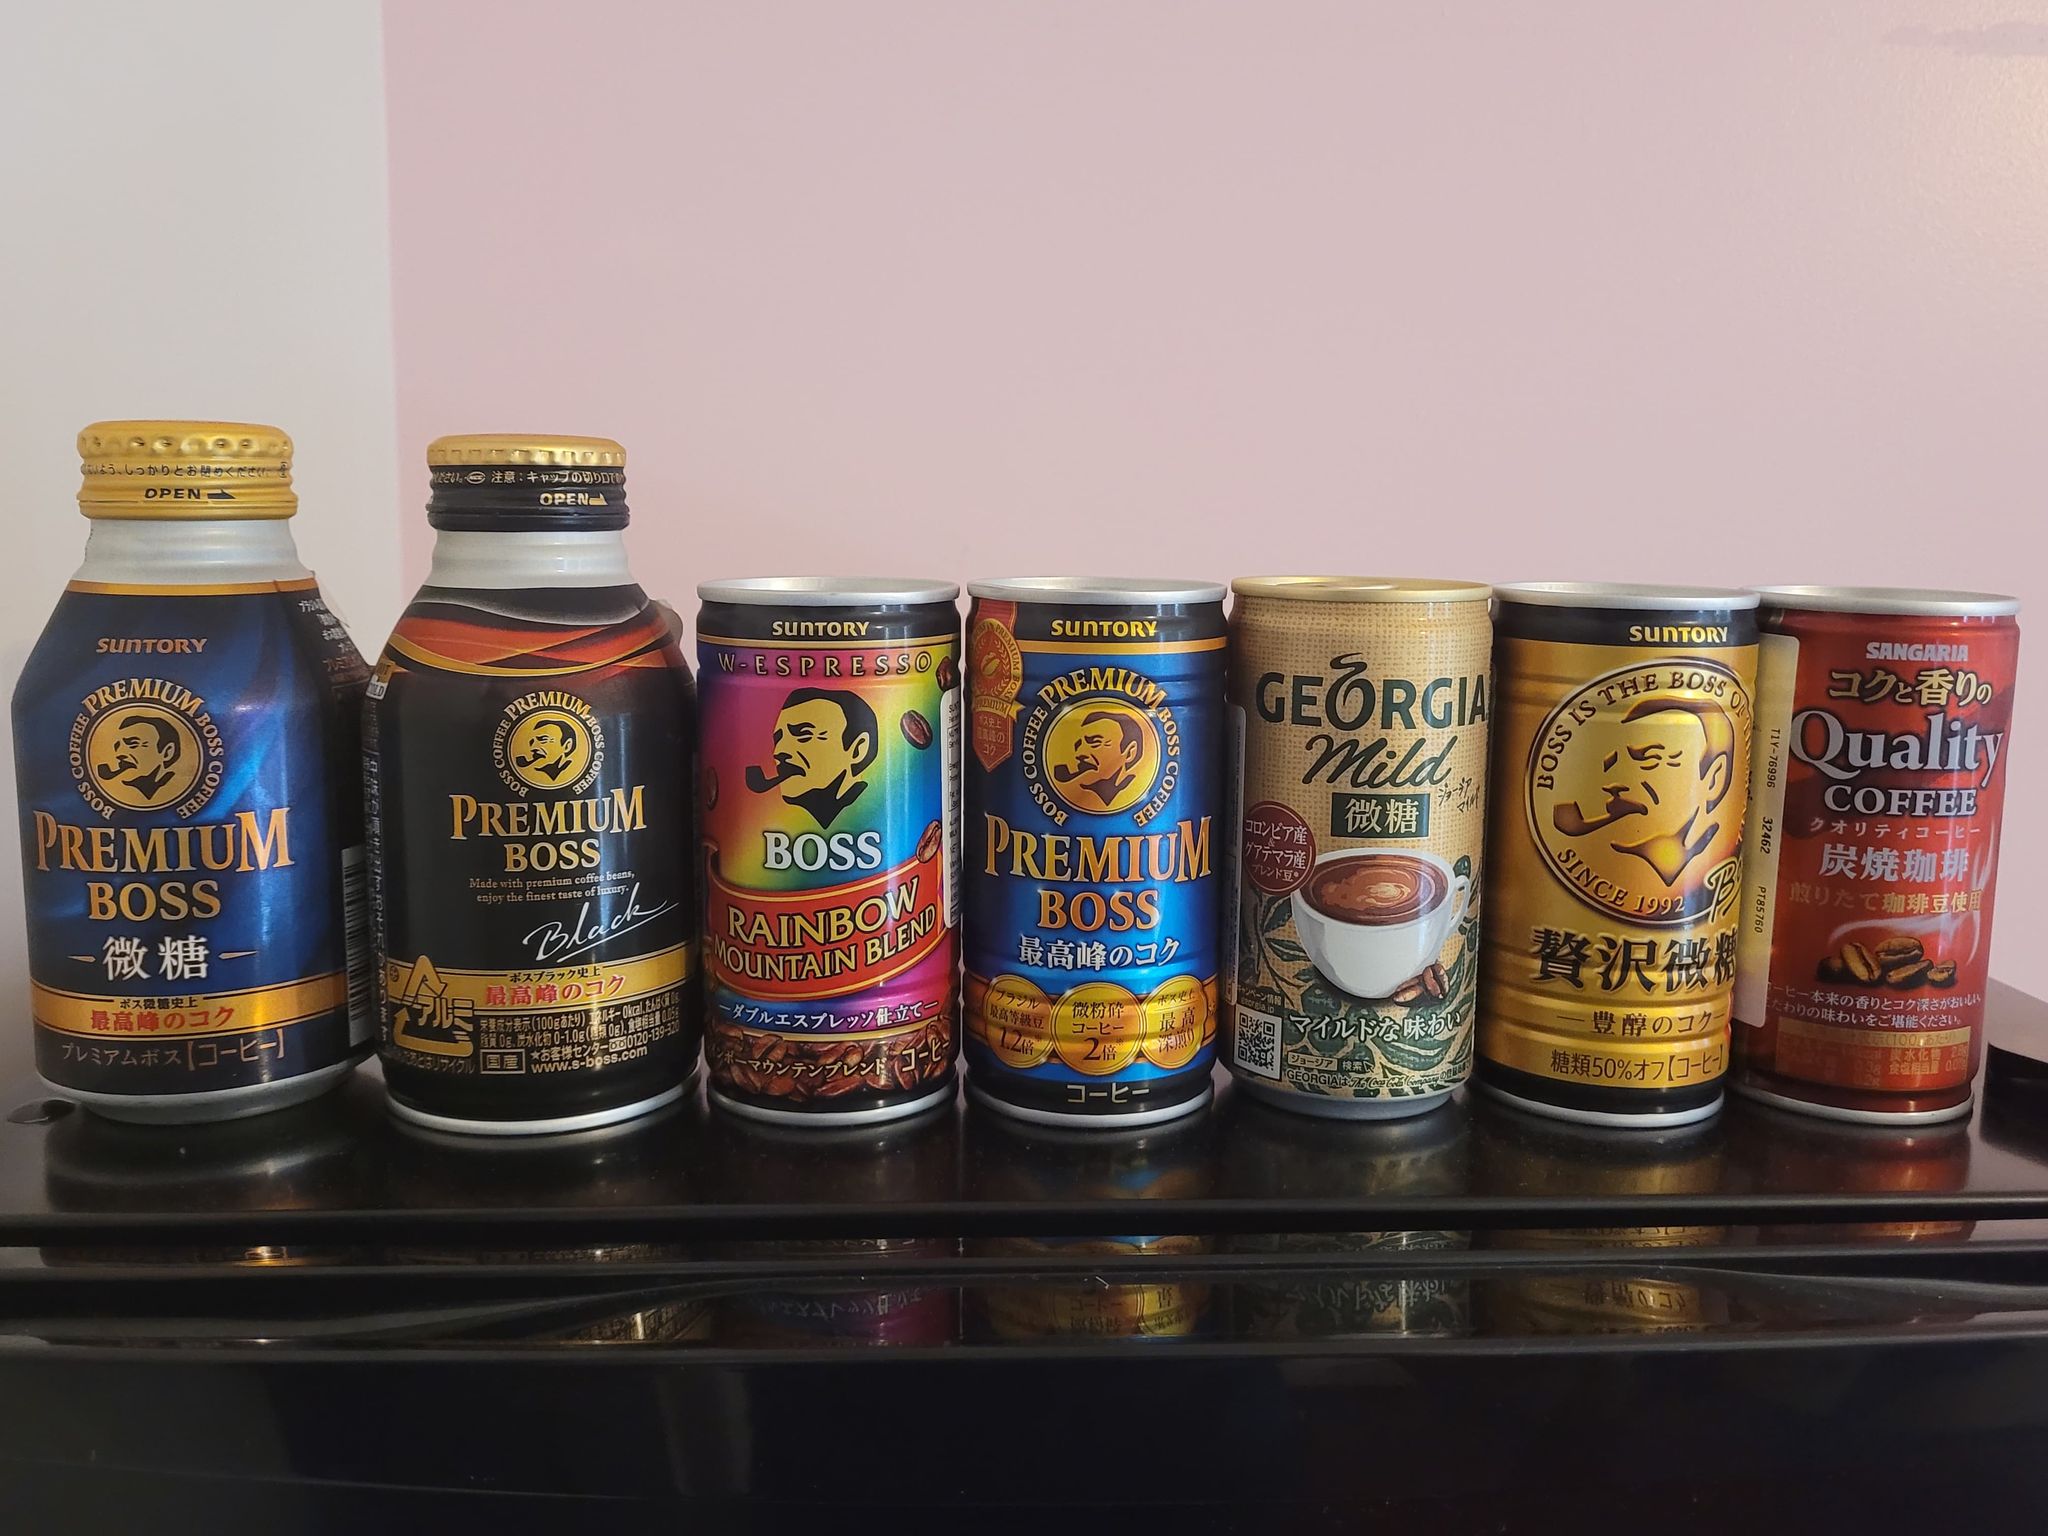 Top 5 Coffee Cans from Japan’s Vending Machines